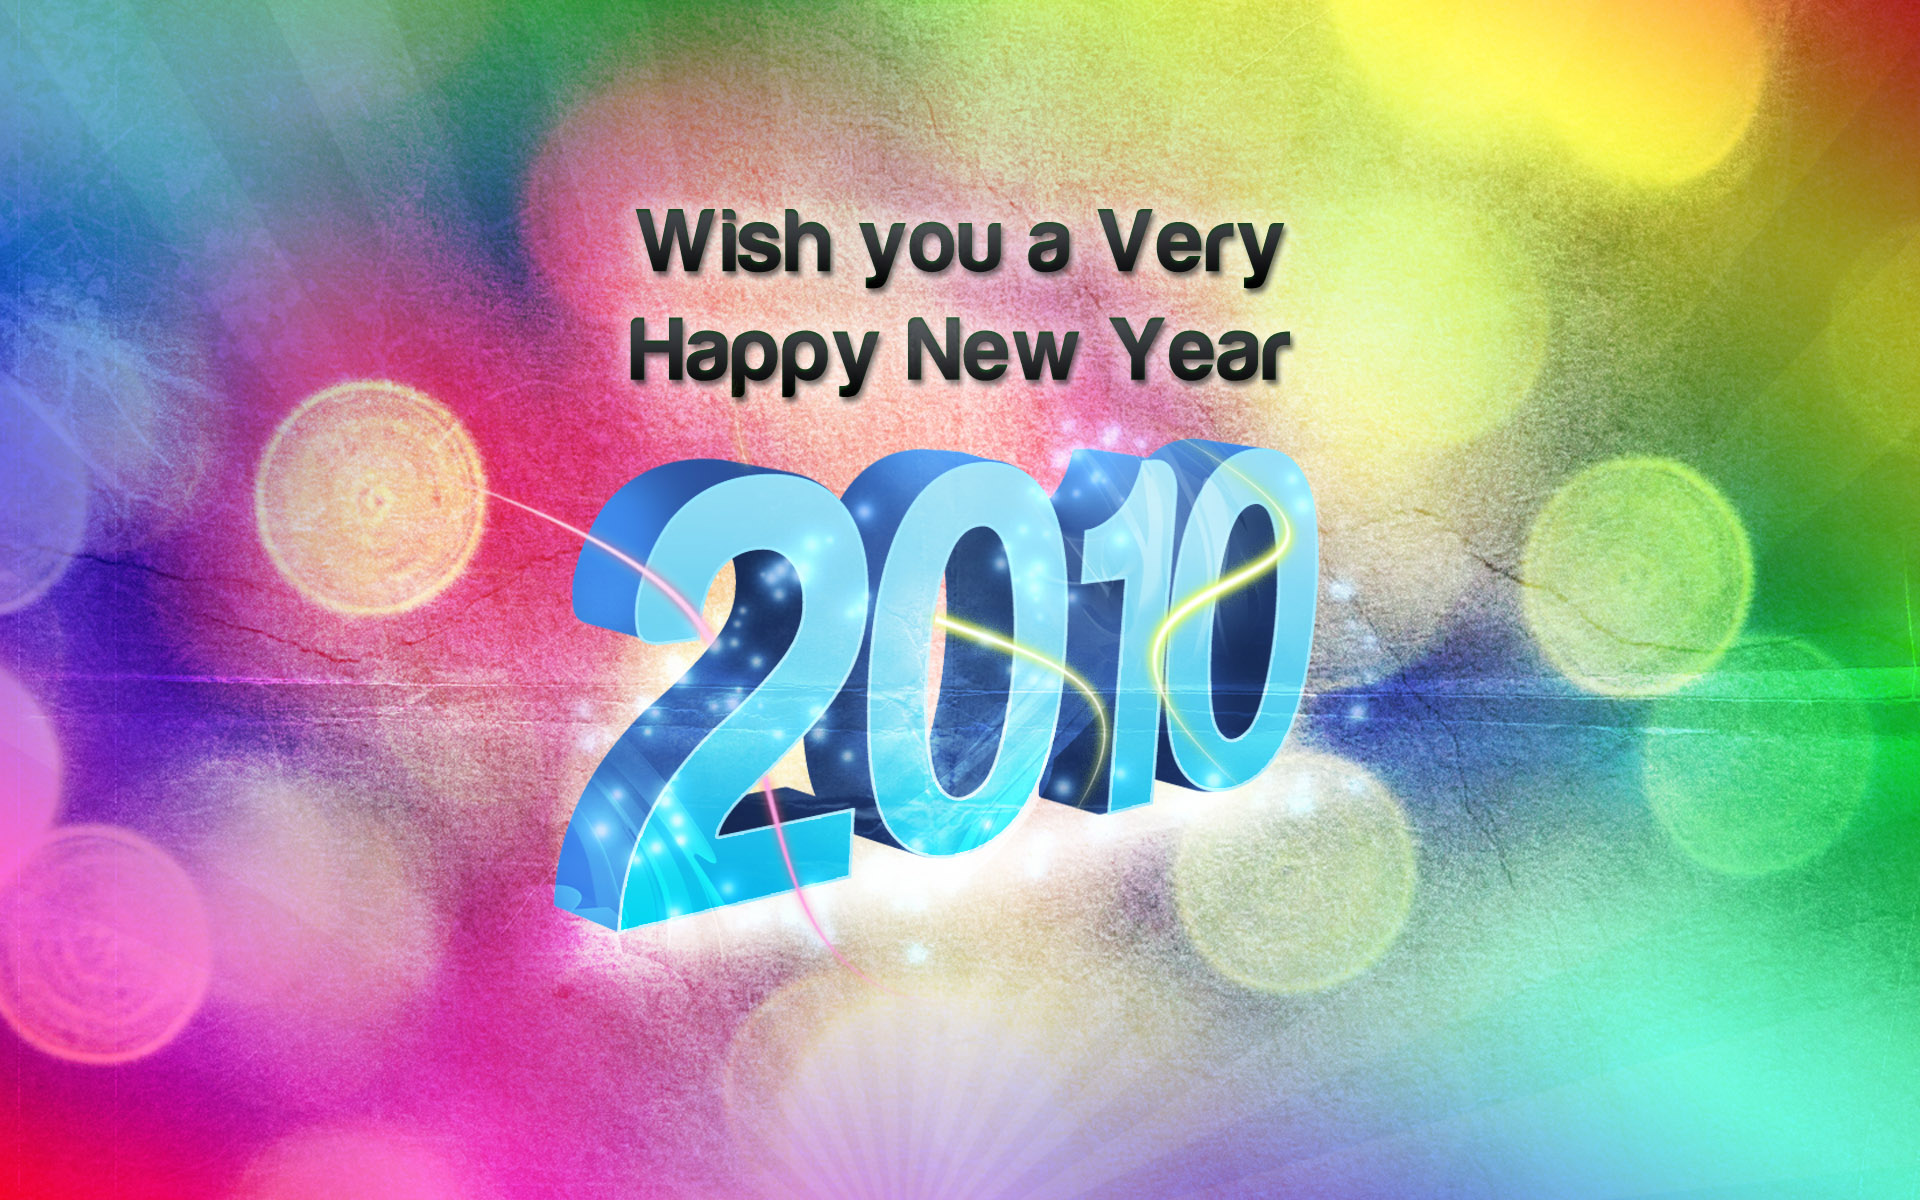 Download High quality Happy New Year 2010 wallpaper / Holidays / 1920x1200